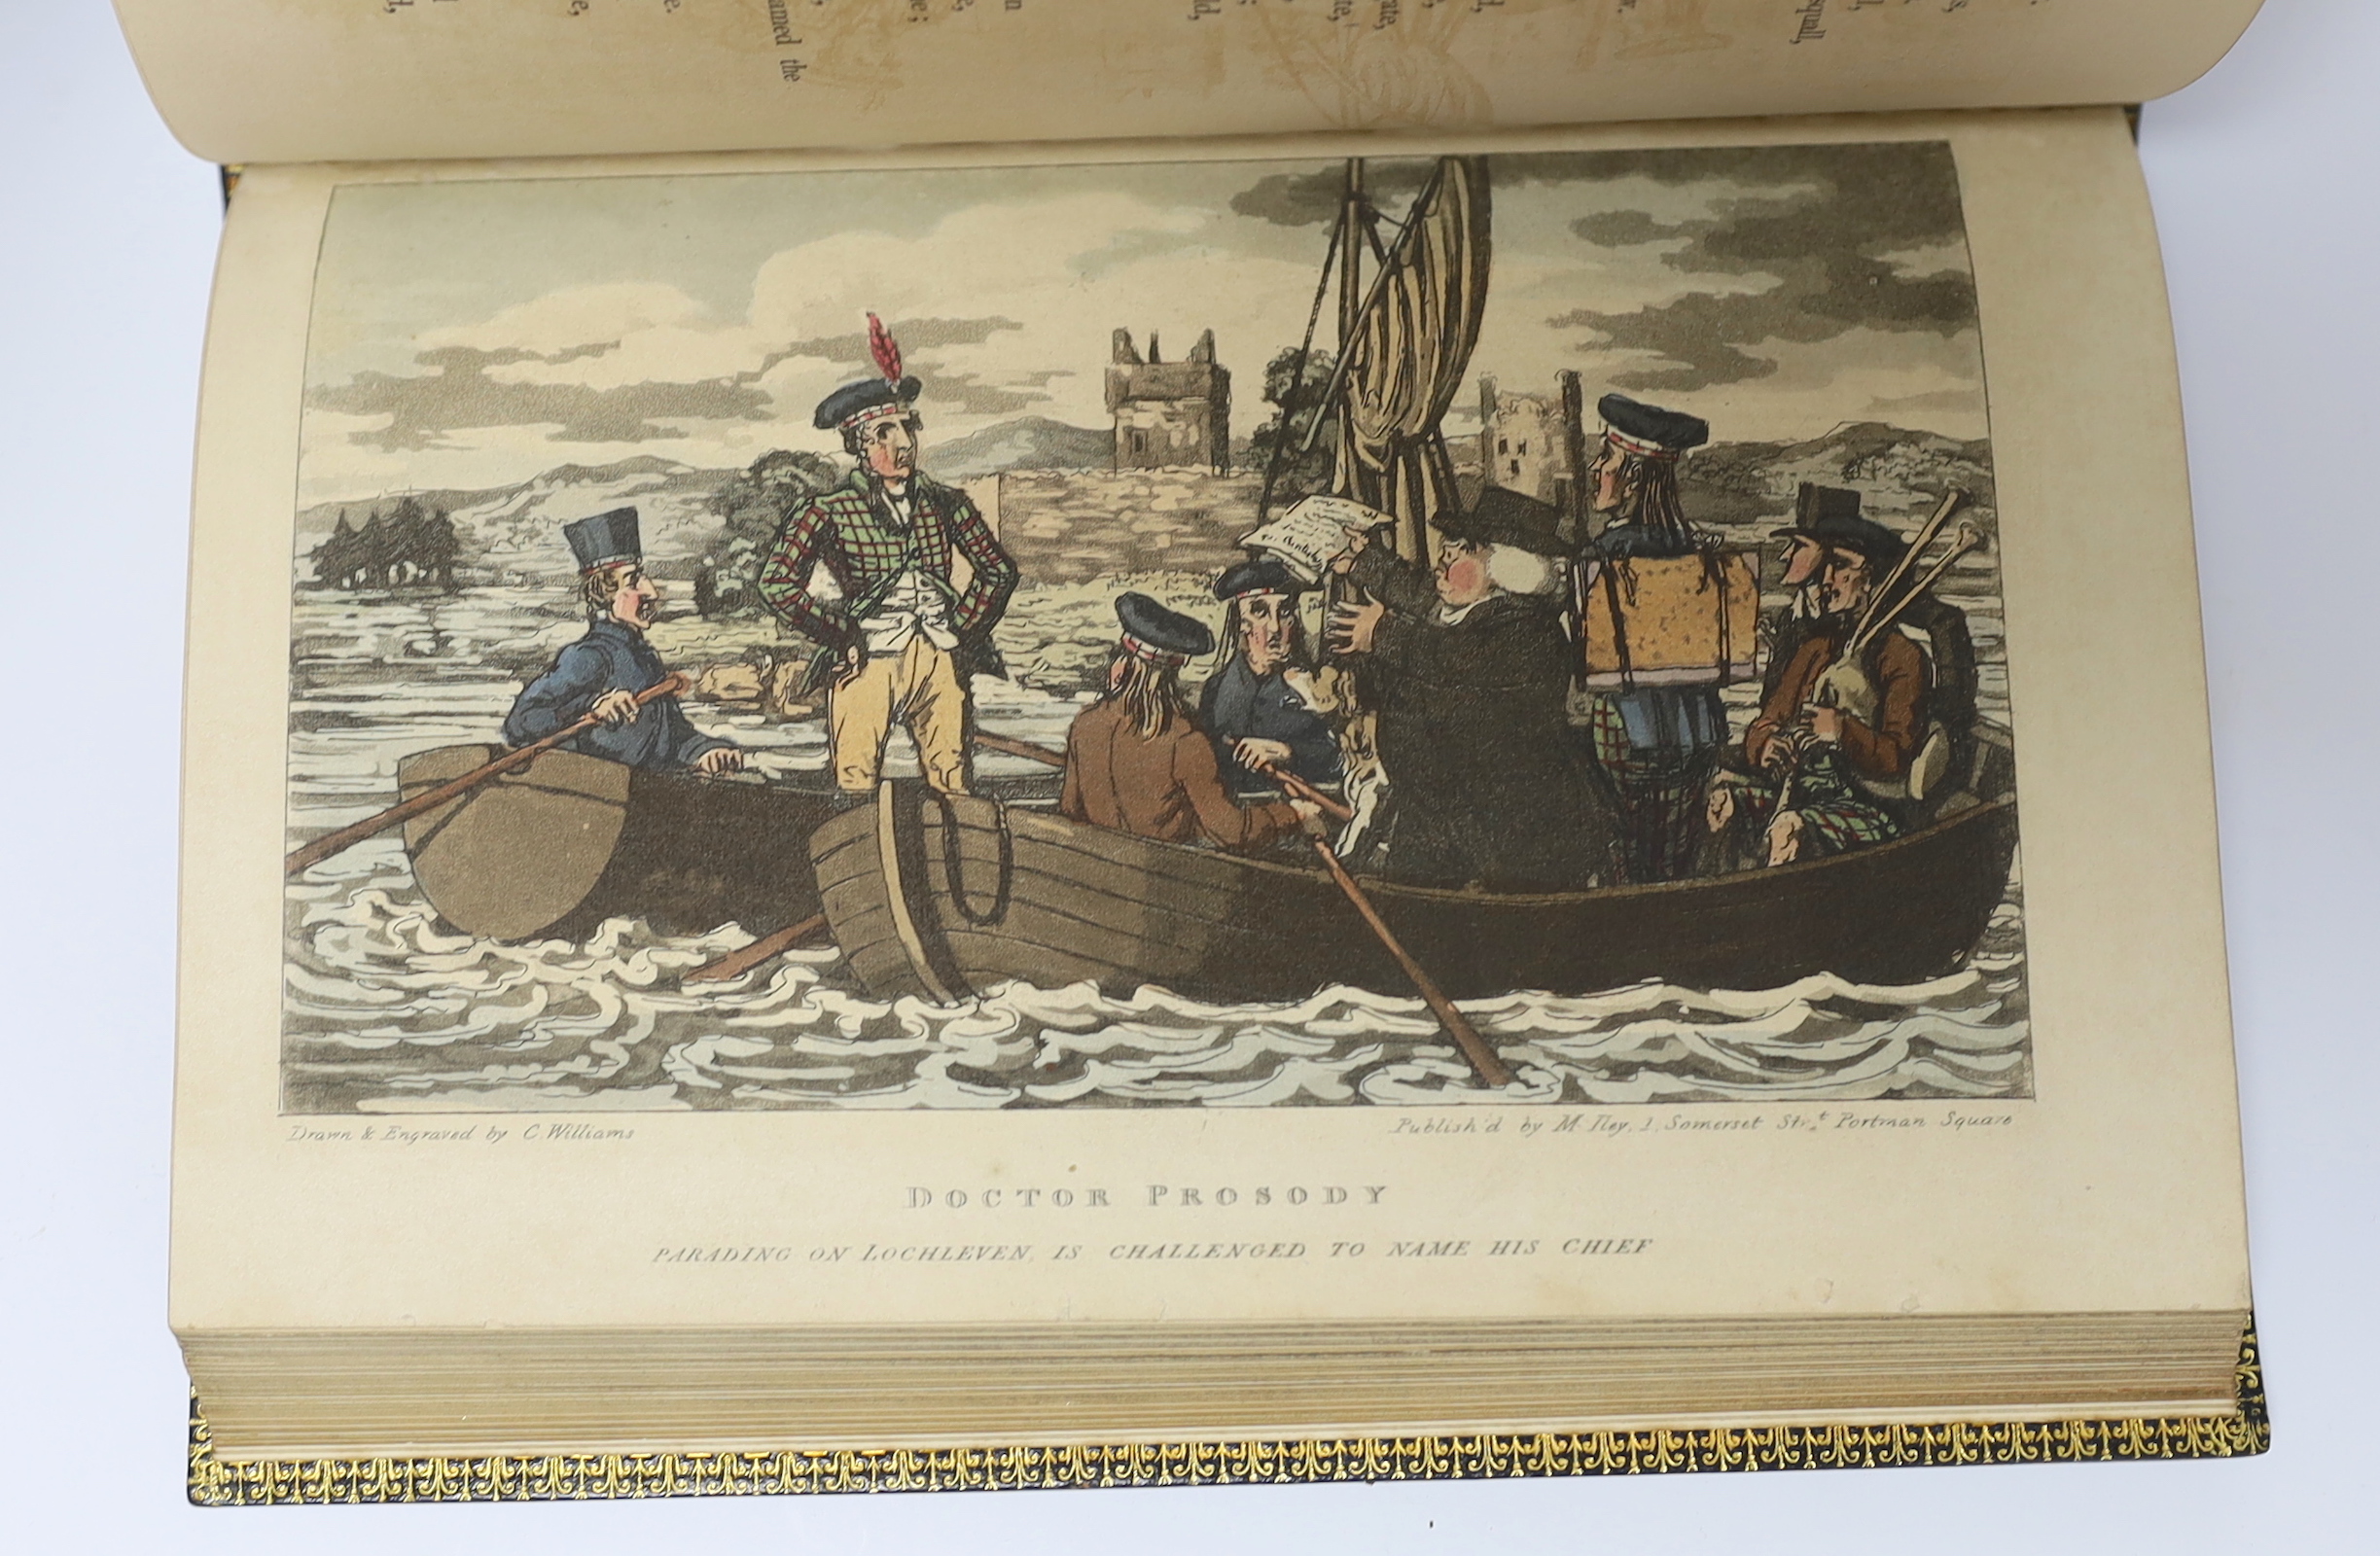 [Rowlandson, Thomas; imitation of] - The Tour of Doctor Prosody, in Search of the Antique and Picturesque, through Scotland, the Hebrides, the Orkney and Shetland Isles, 1st edition, 8vo, in later fine dark blue and gilt